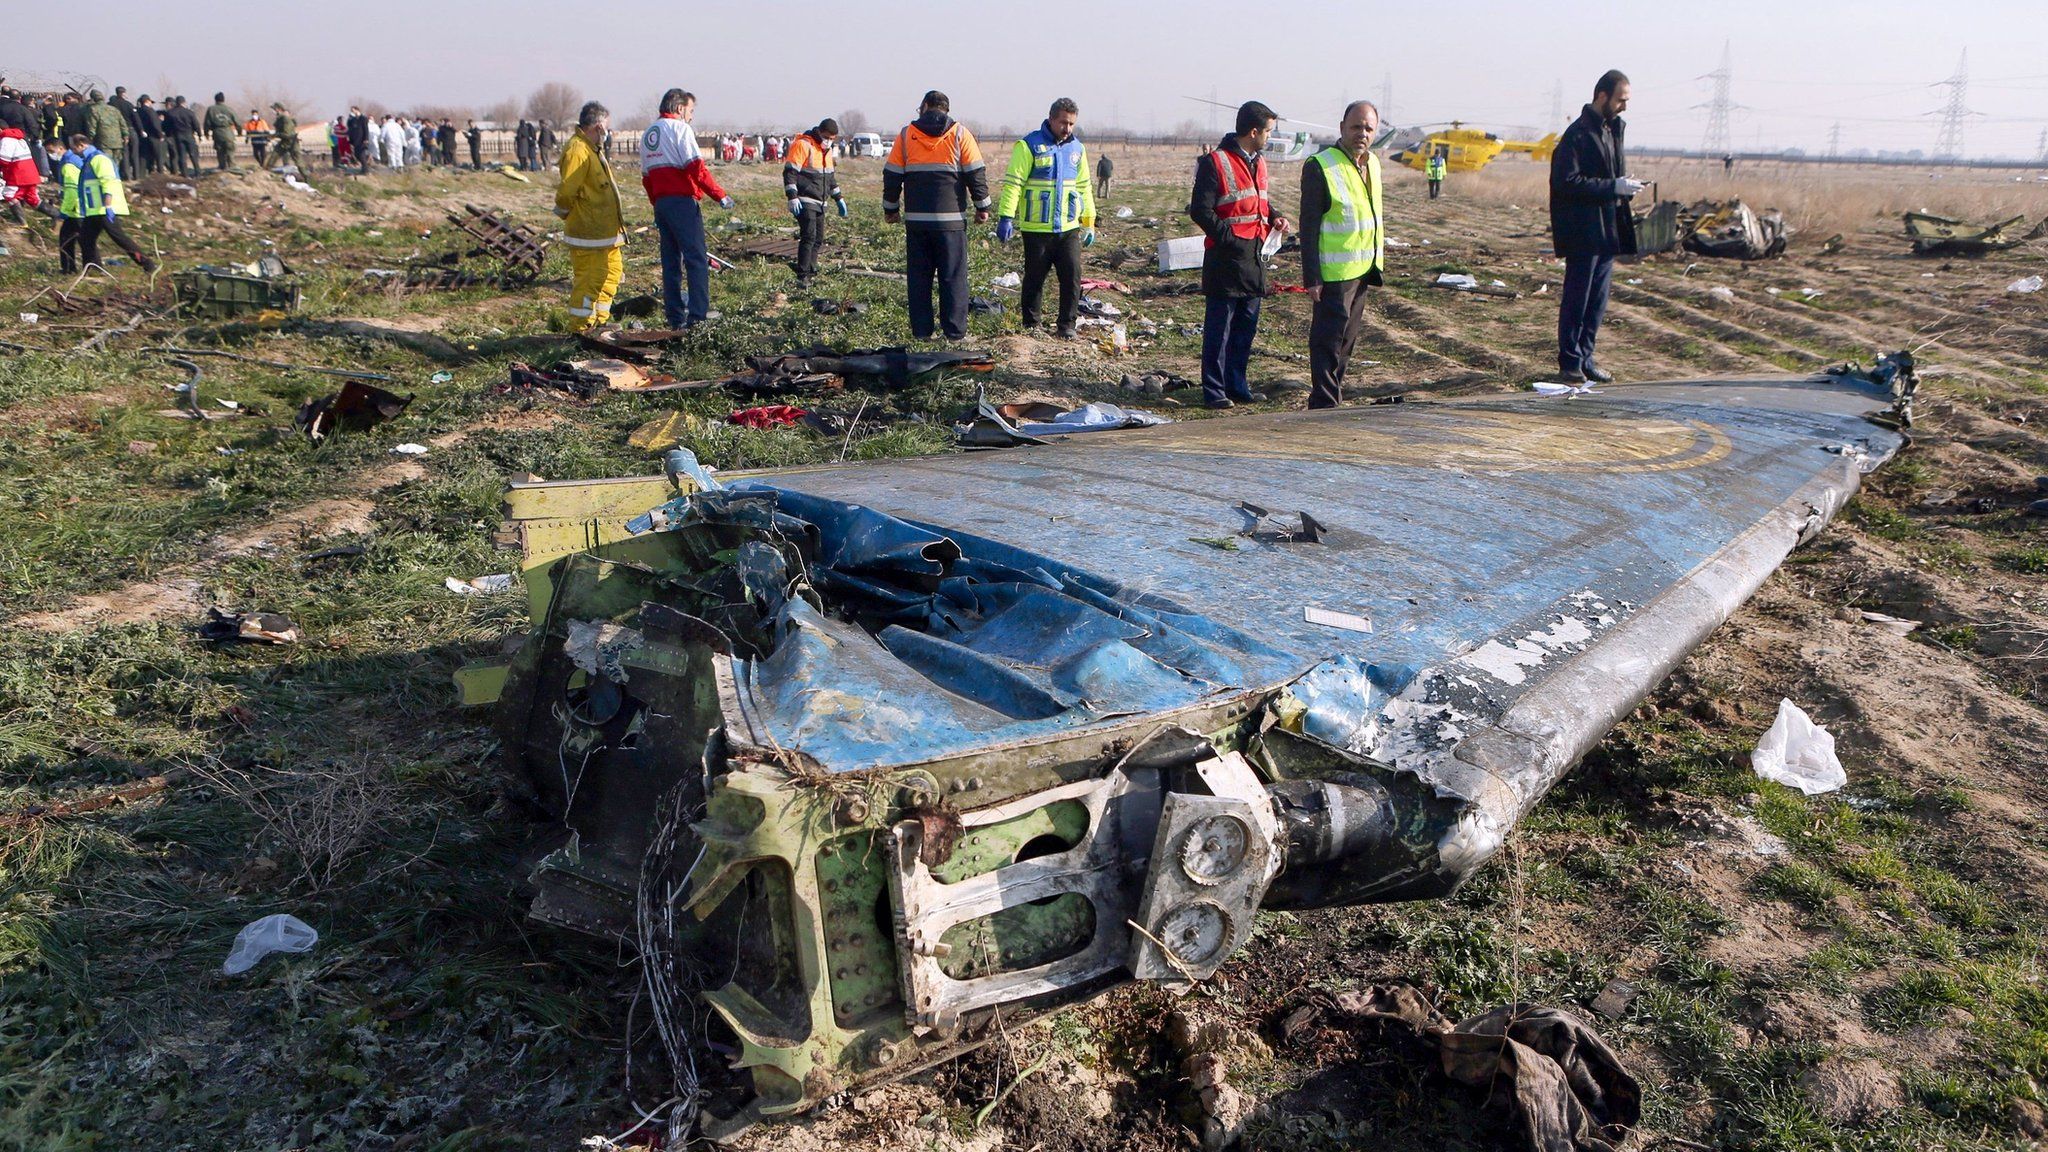 Ukraine rejects Iran's final report on downing of flight PS752